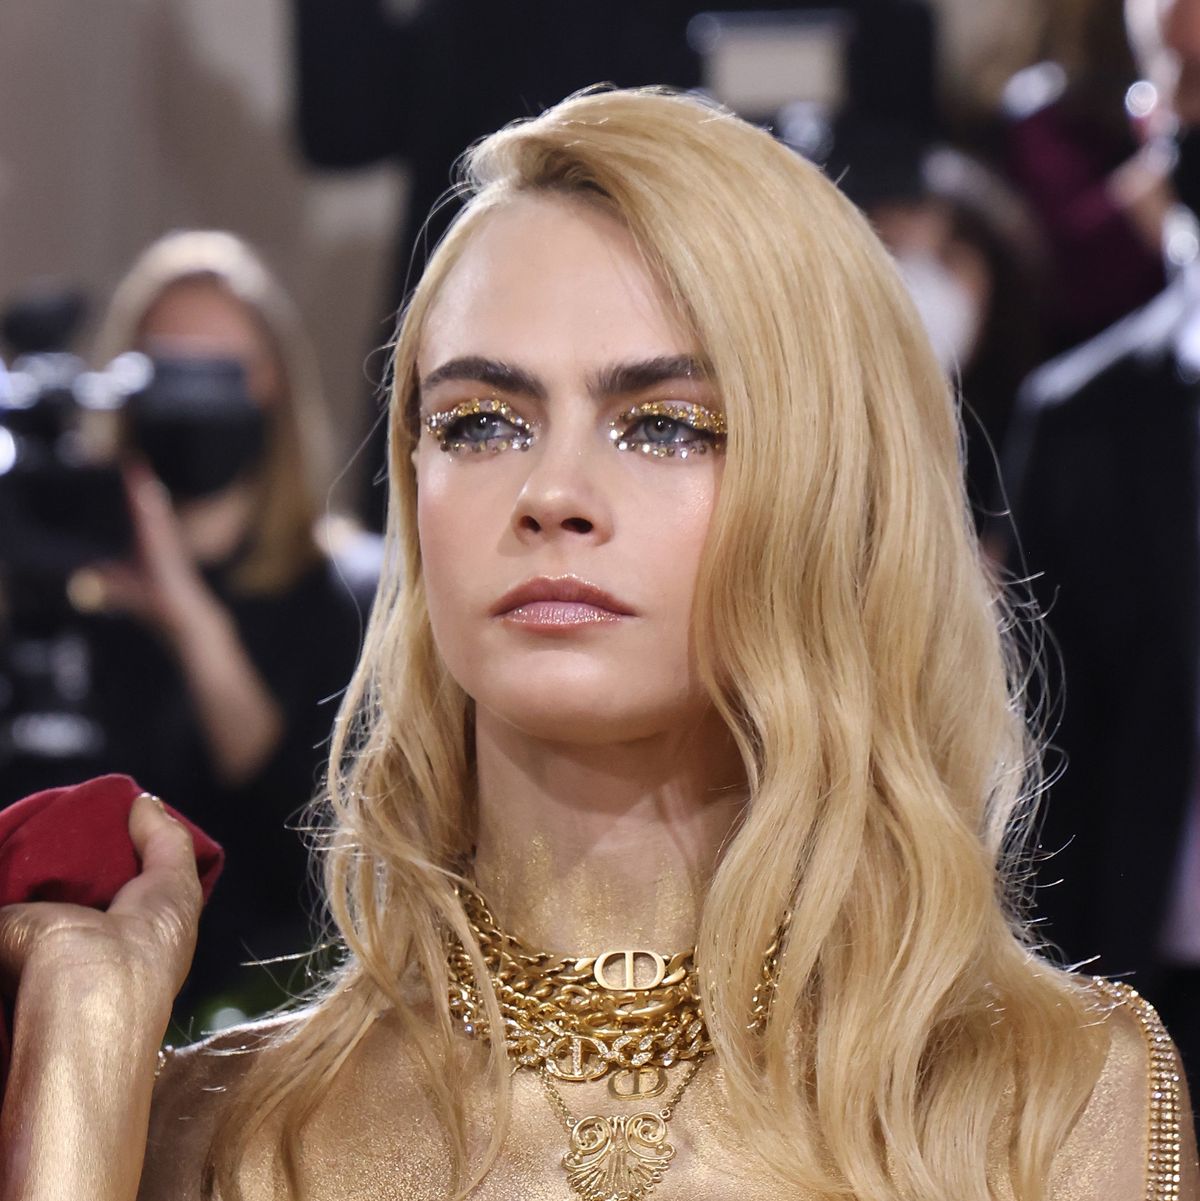 Cara Delevingne attended the Met Gala topless and painted in gold